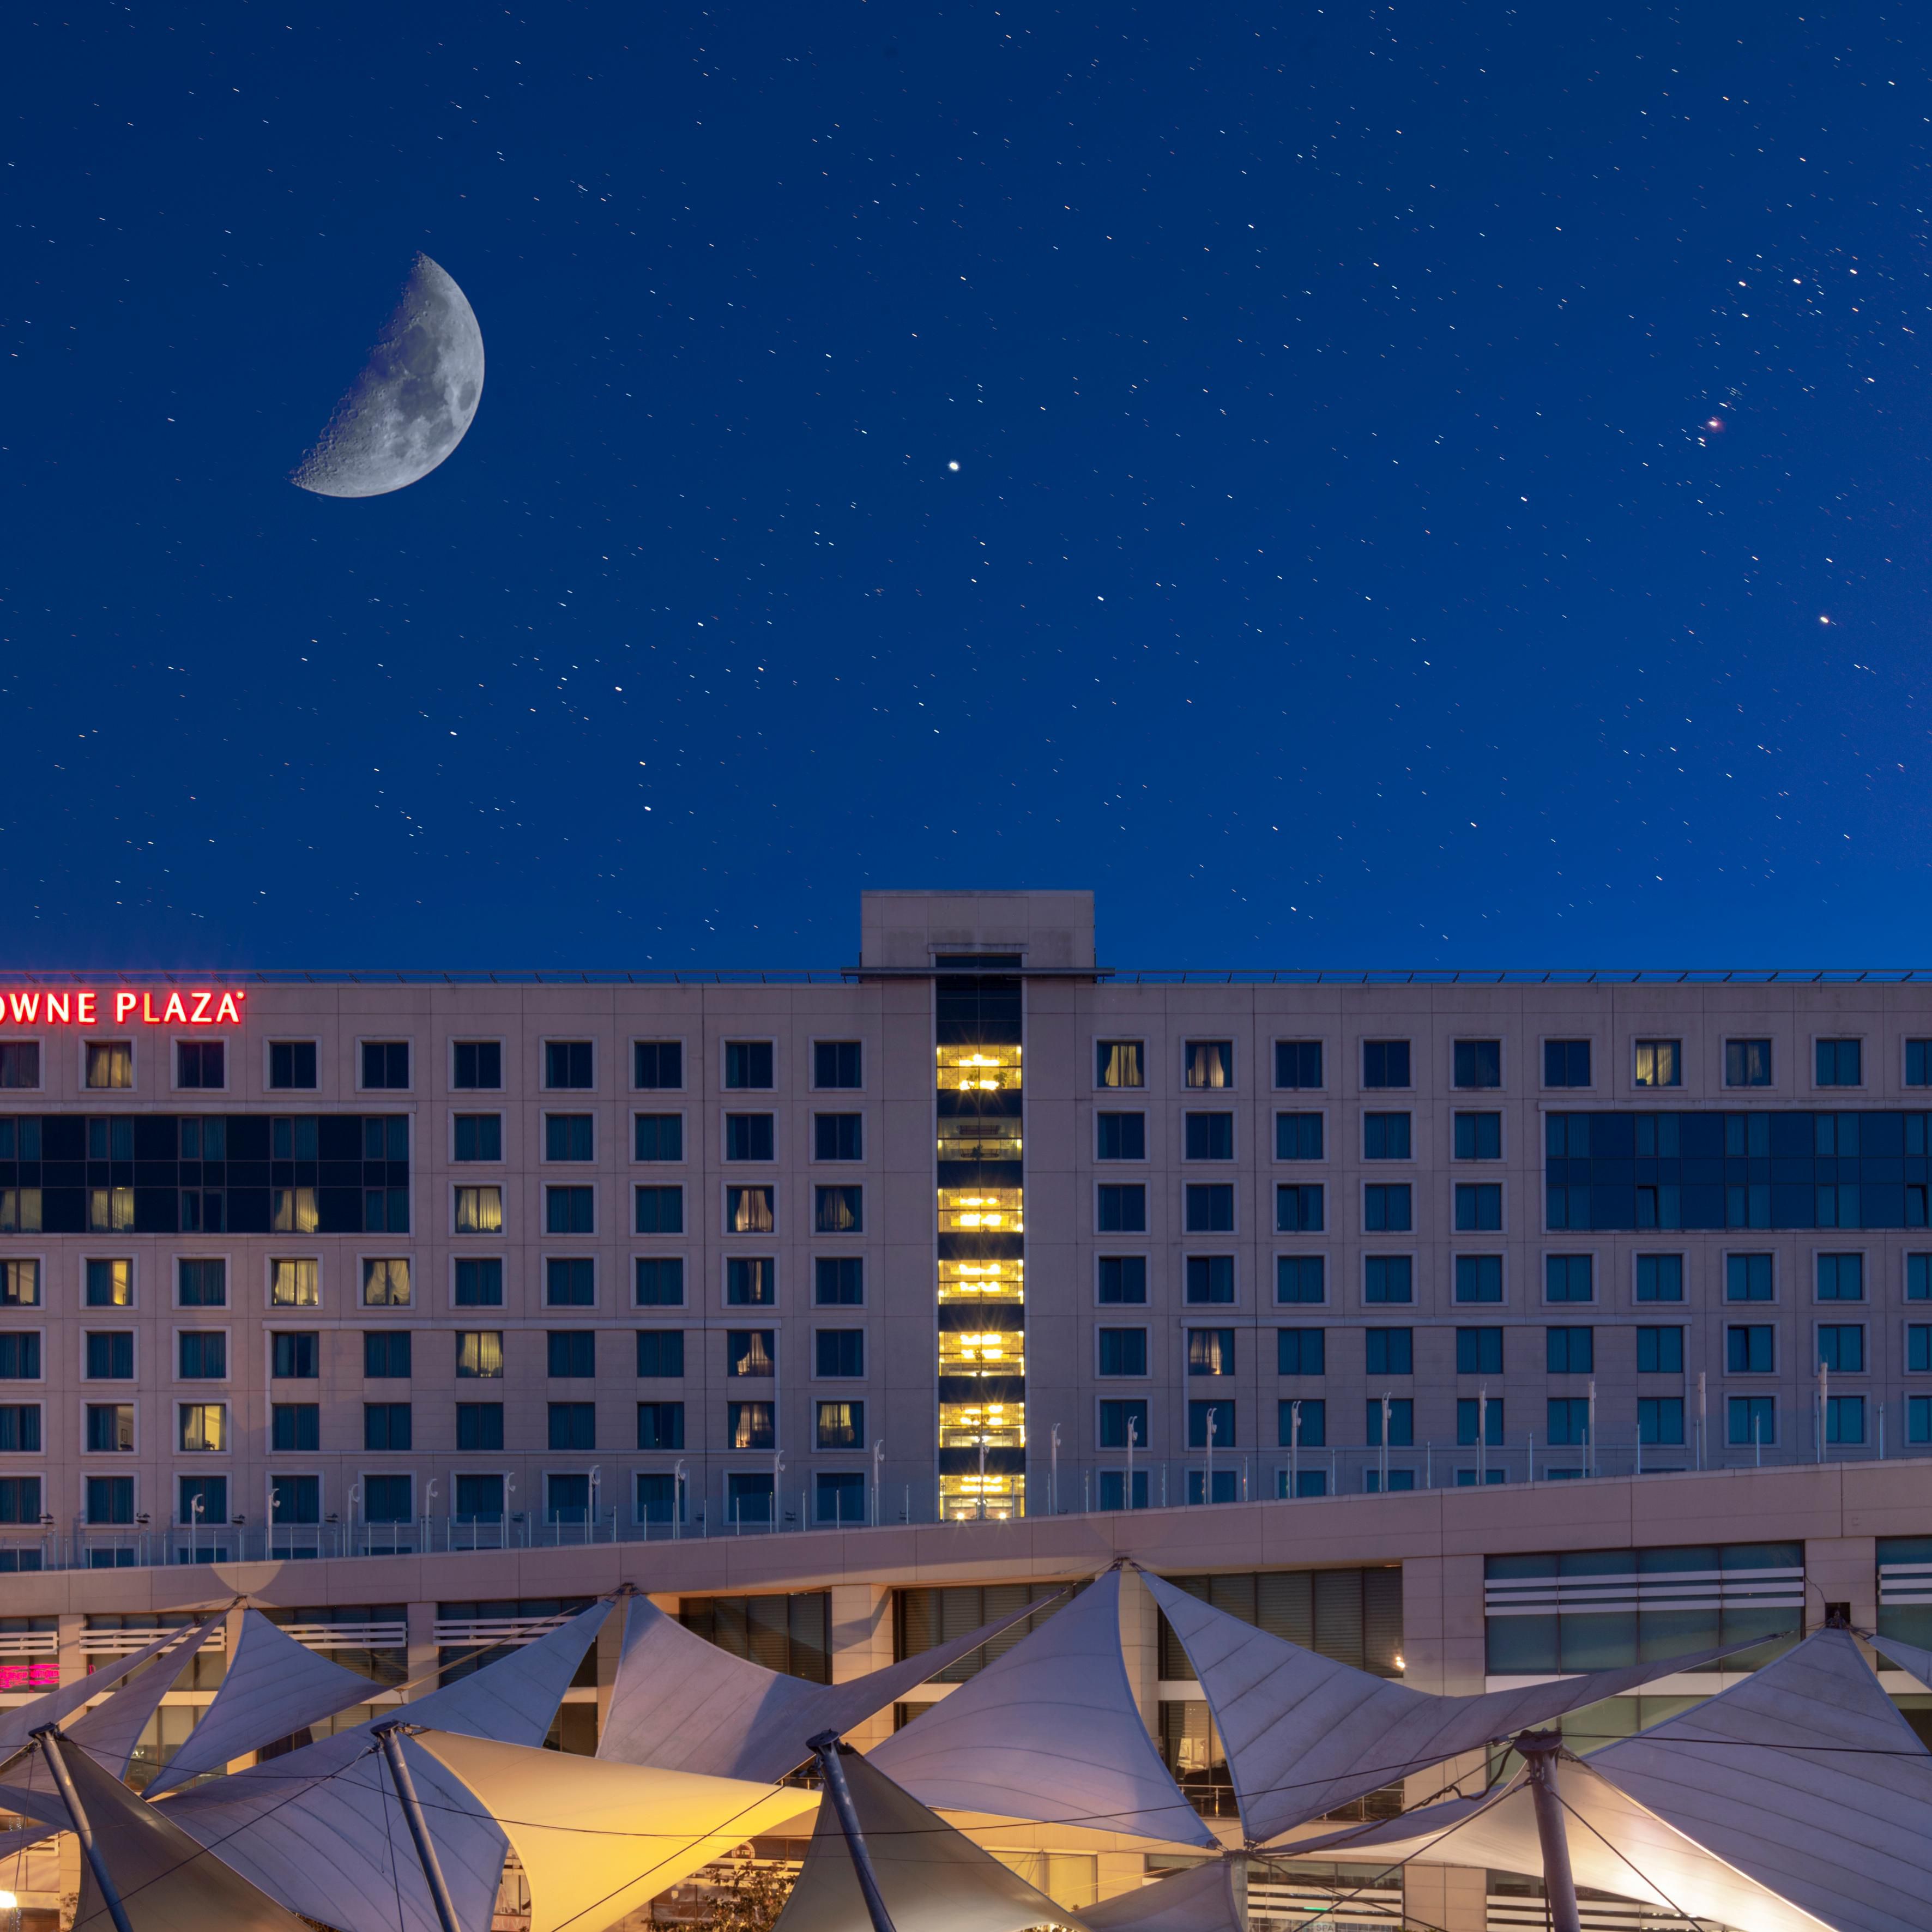 Stay with Crowne Plaza located in the heart of Istanbul!